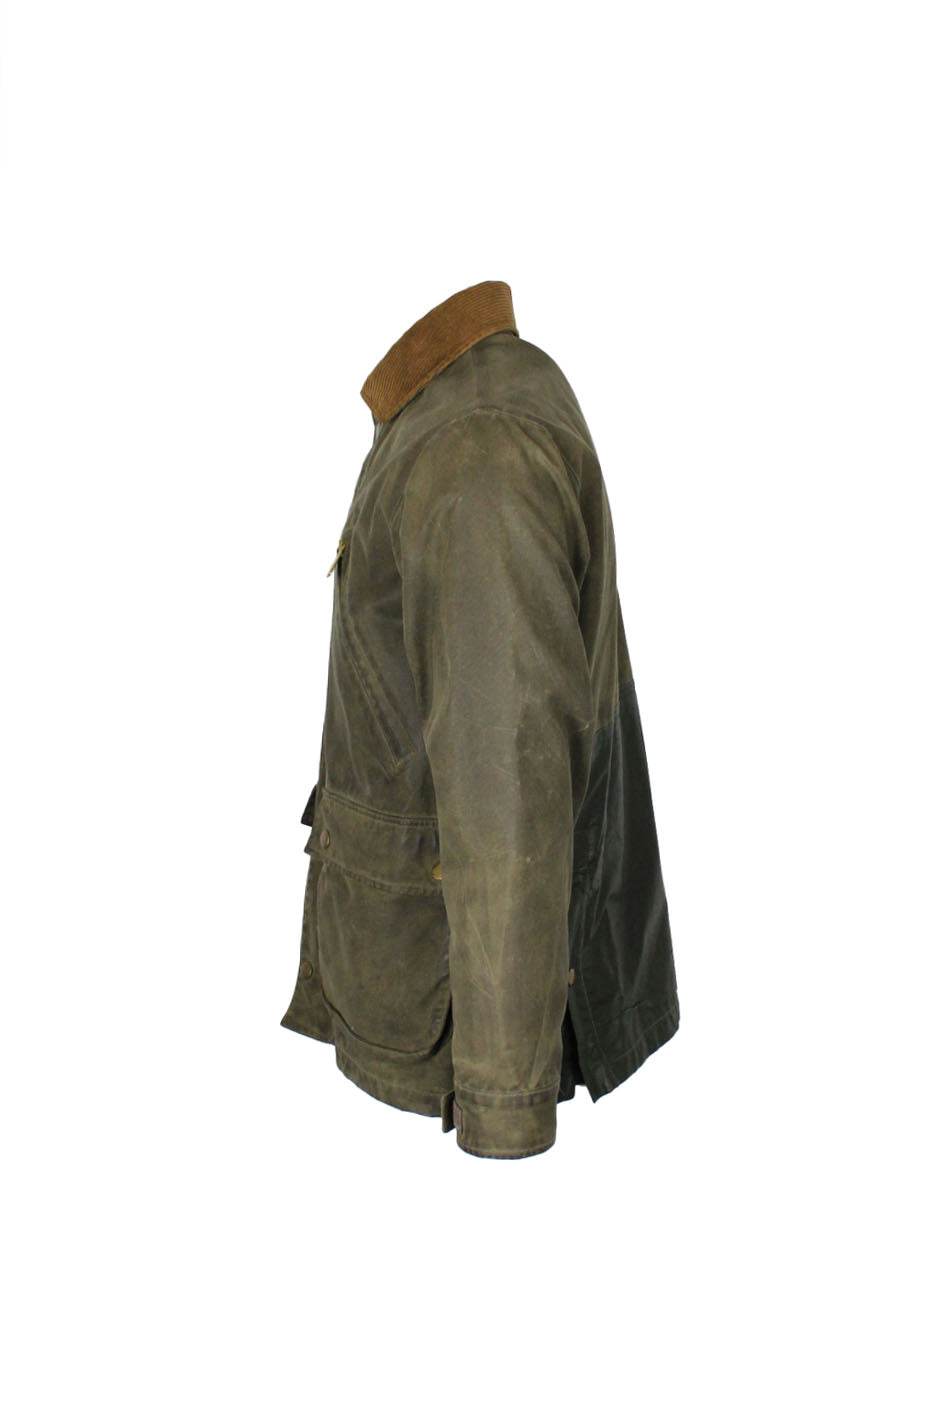 profile view of left sleeve of jacket.